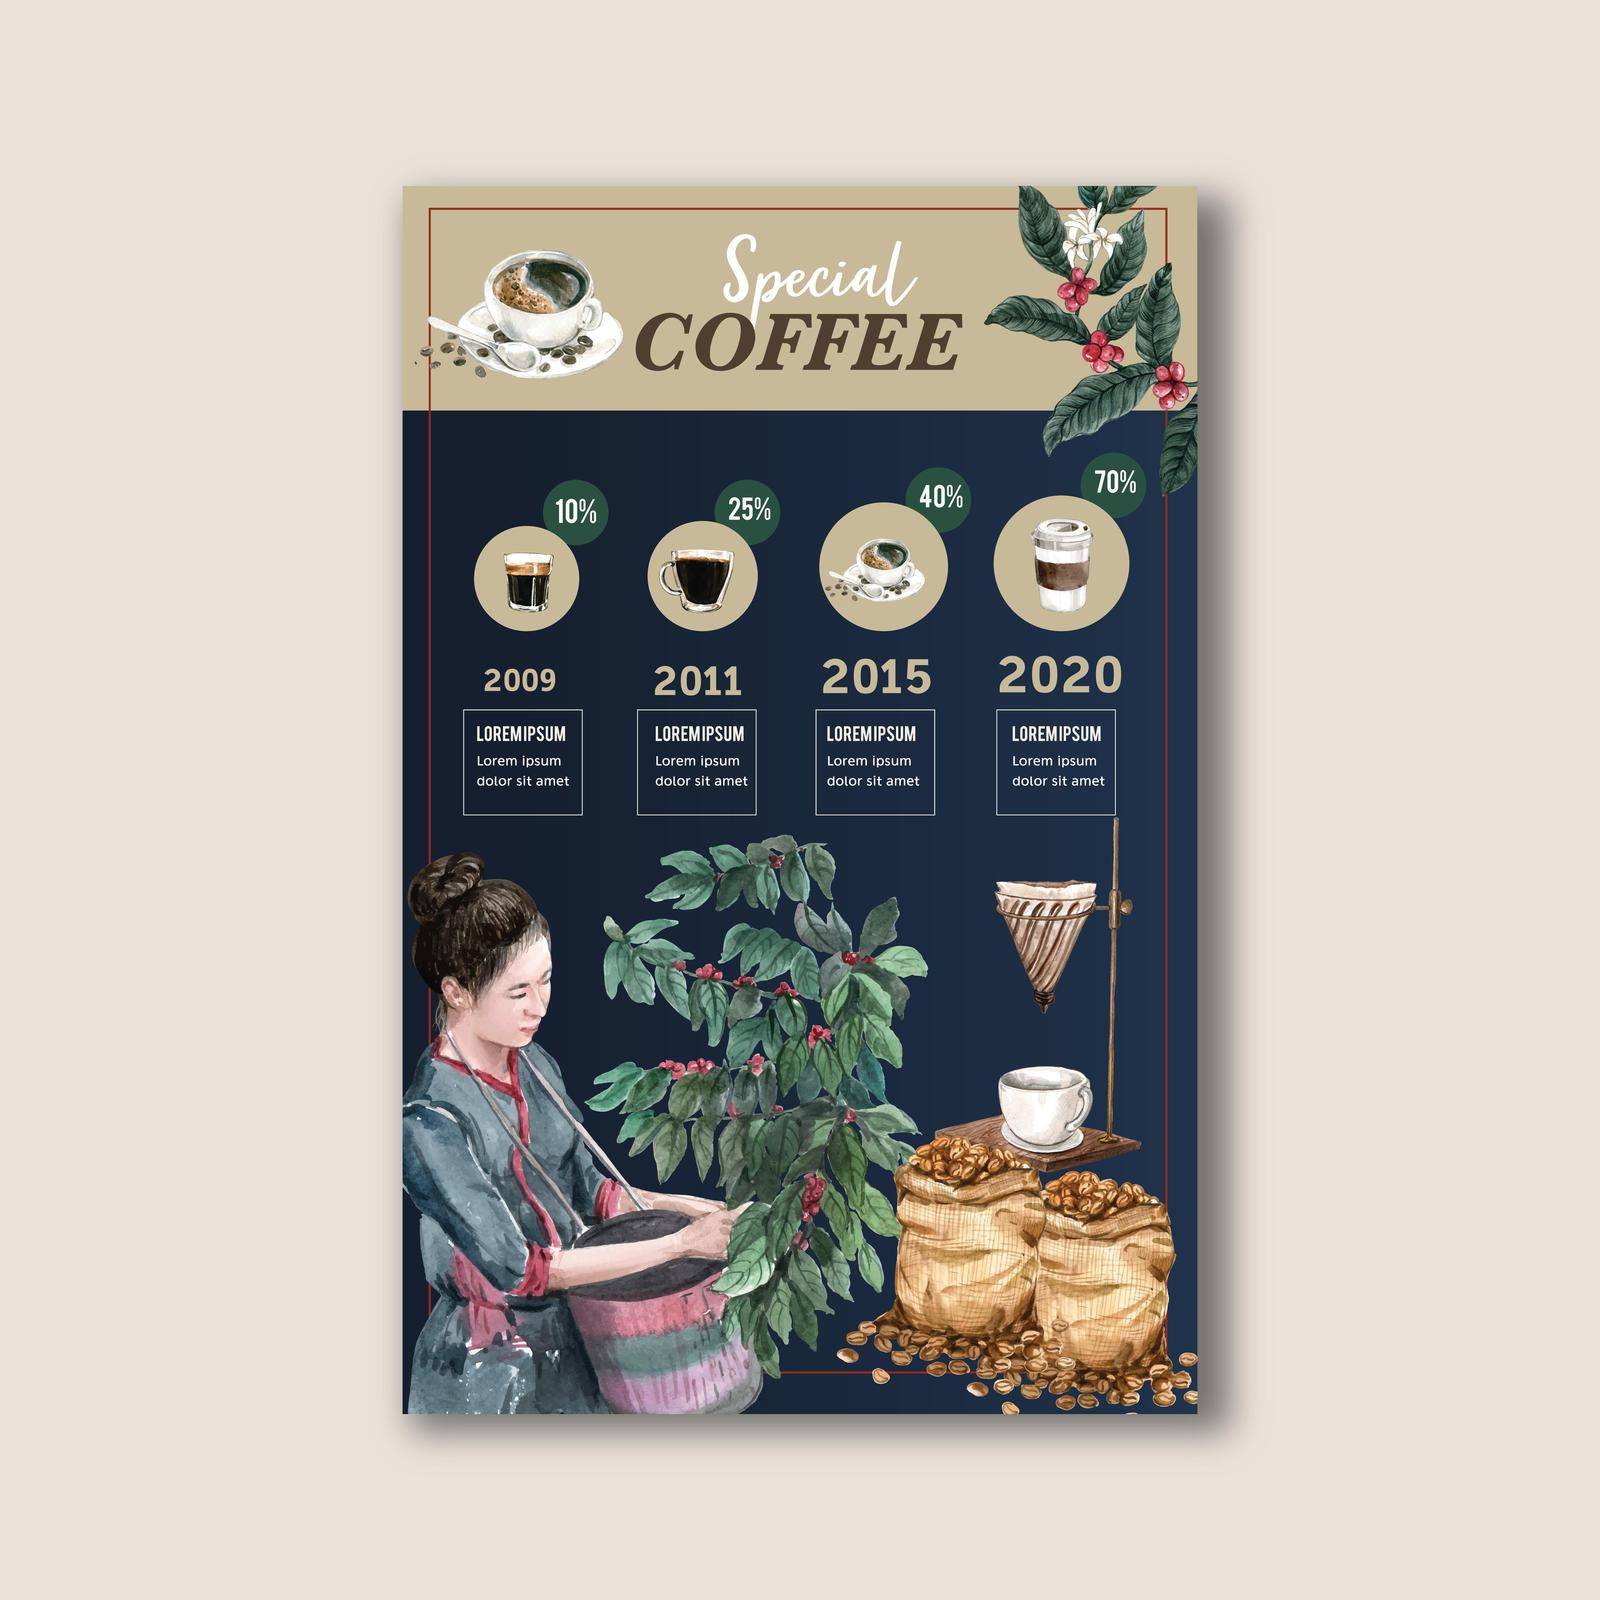 coffee arabica roast beans burn with bag. coffee maker, infographic design watercolor illustration